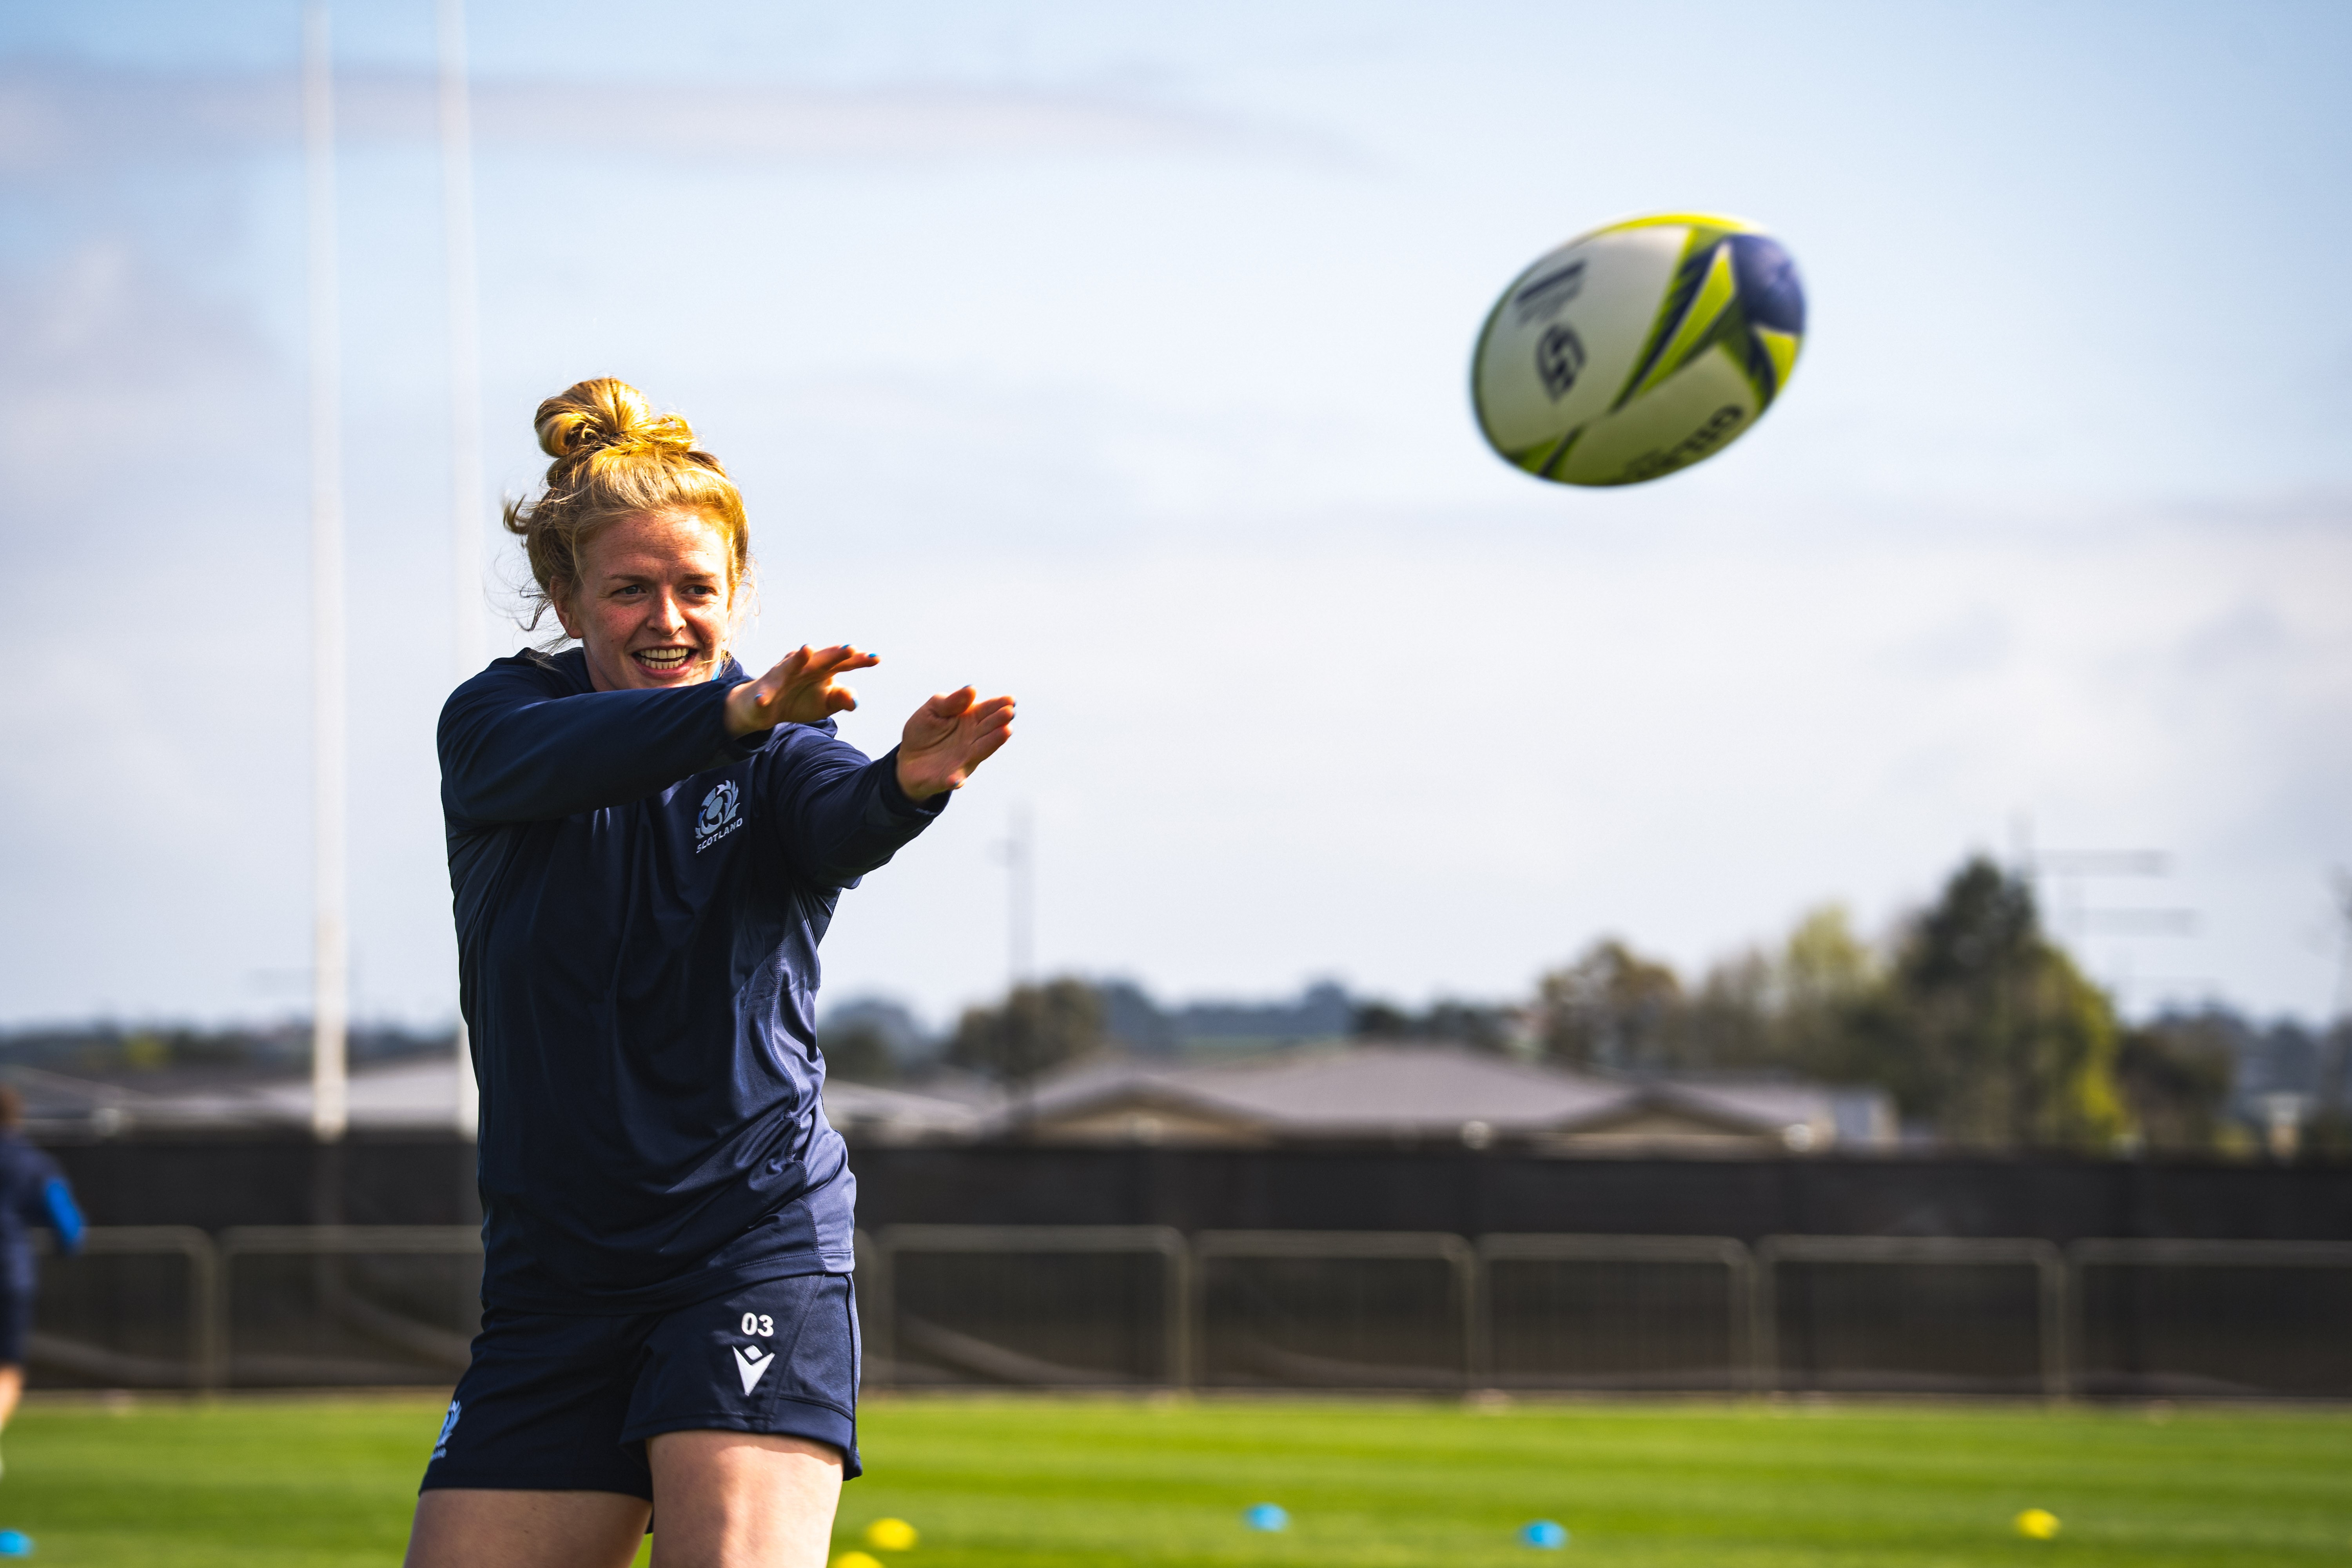 Image shows rugby player throwing ball.